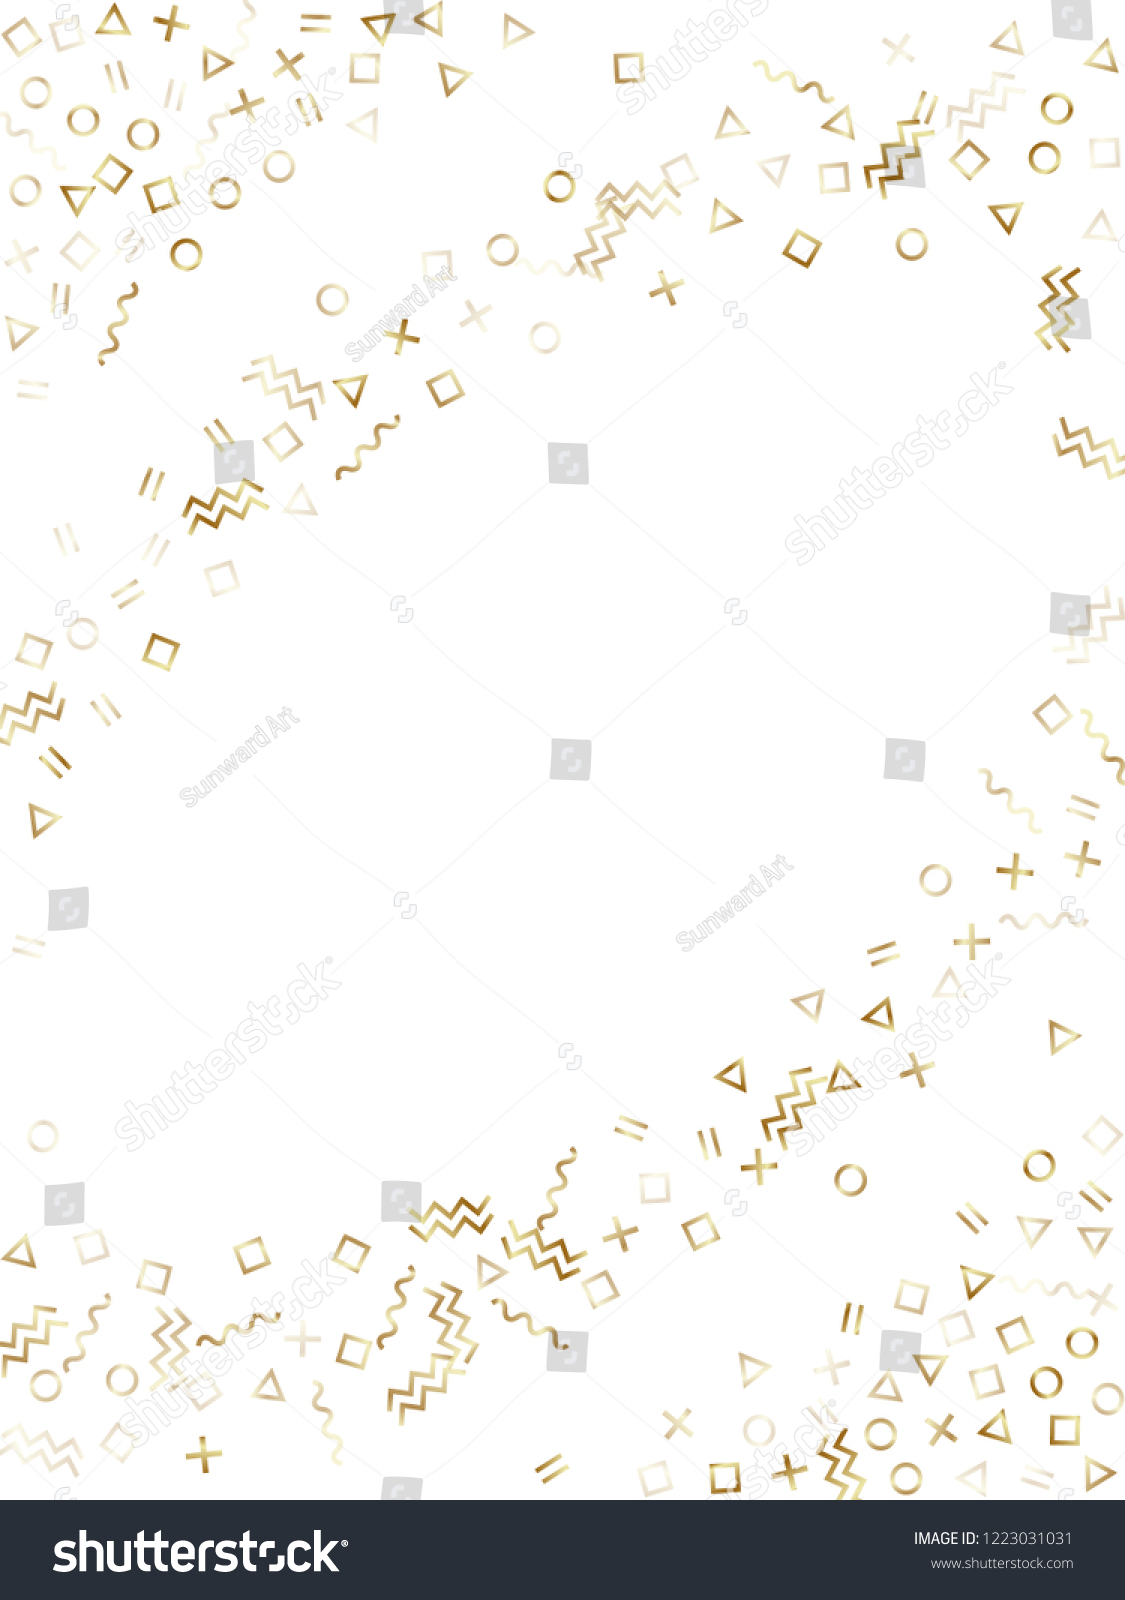 Memphis style gold geometric confetti vector background with triangle, circle, square shapes, zigzag and wavy line ribbons. Glossy 80s style bauhaus gold decor confetti falling on white. #1223031031